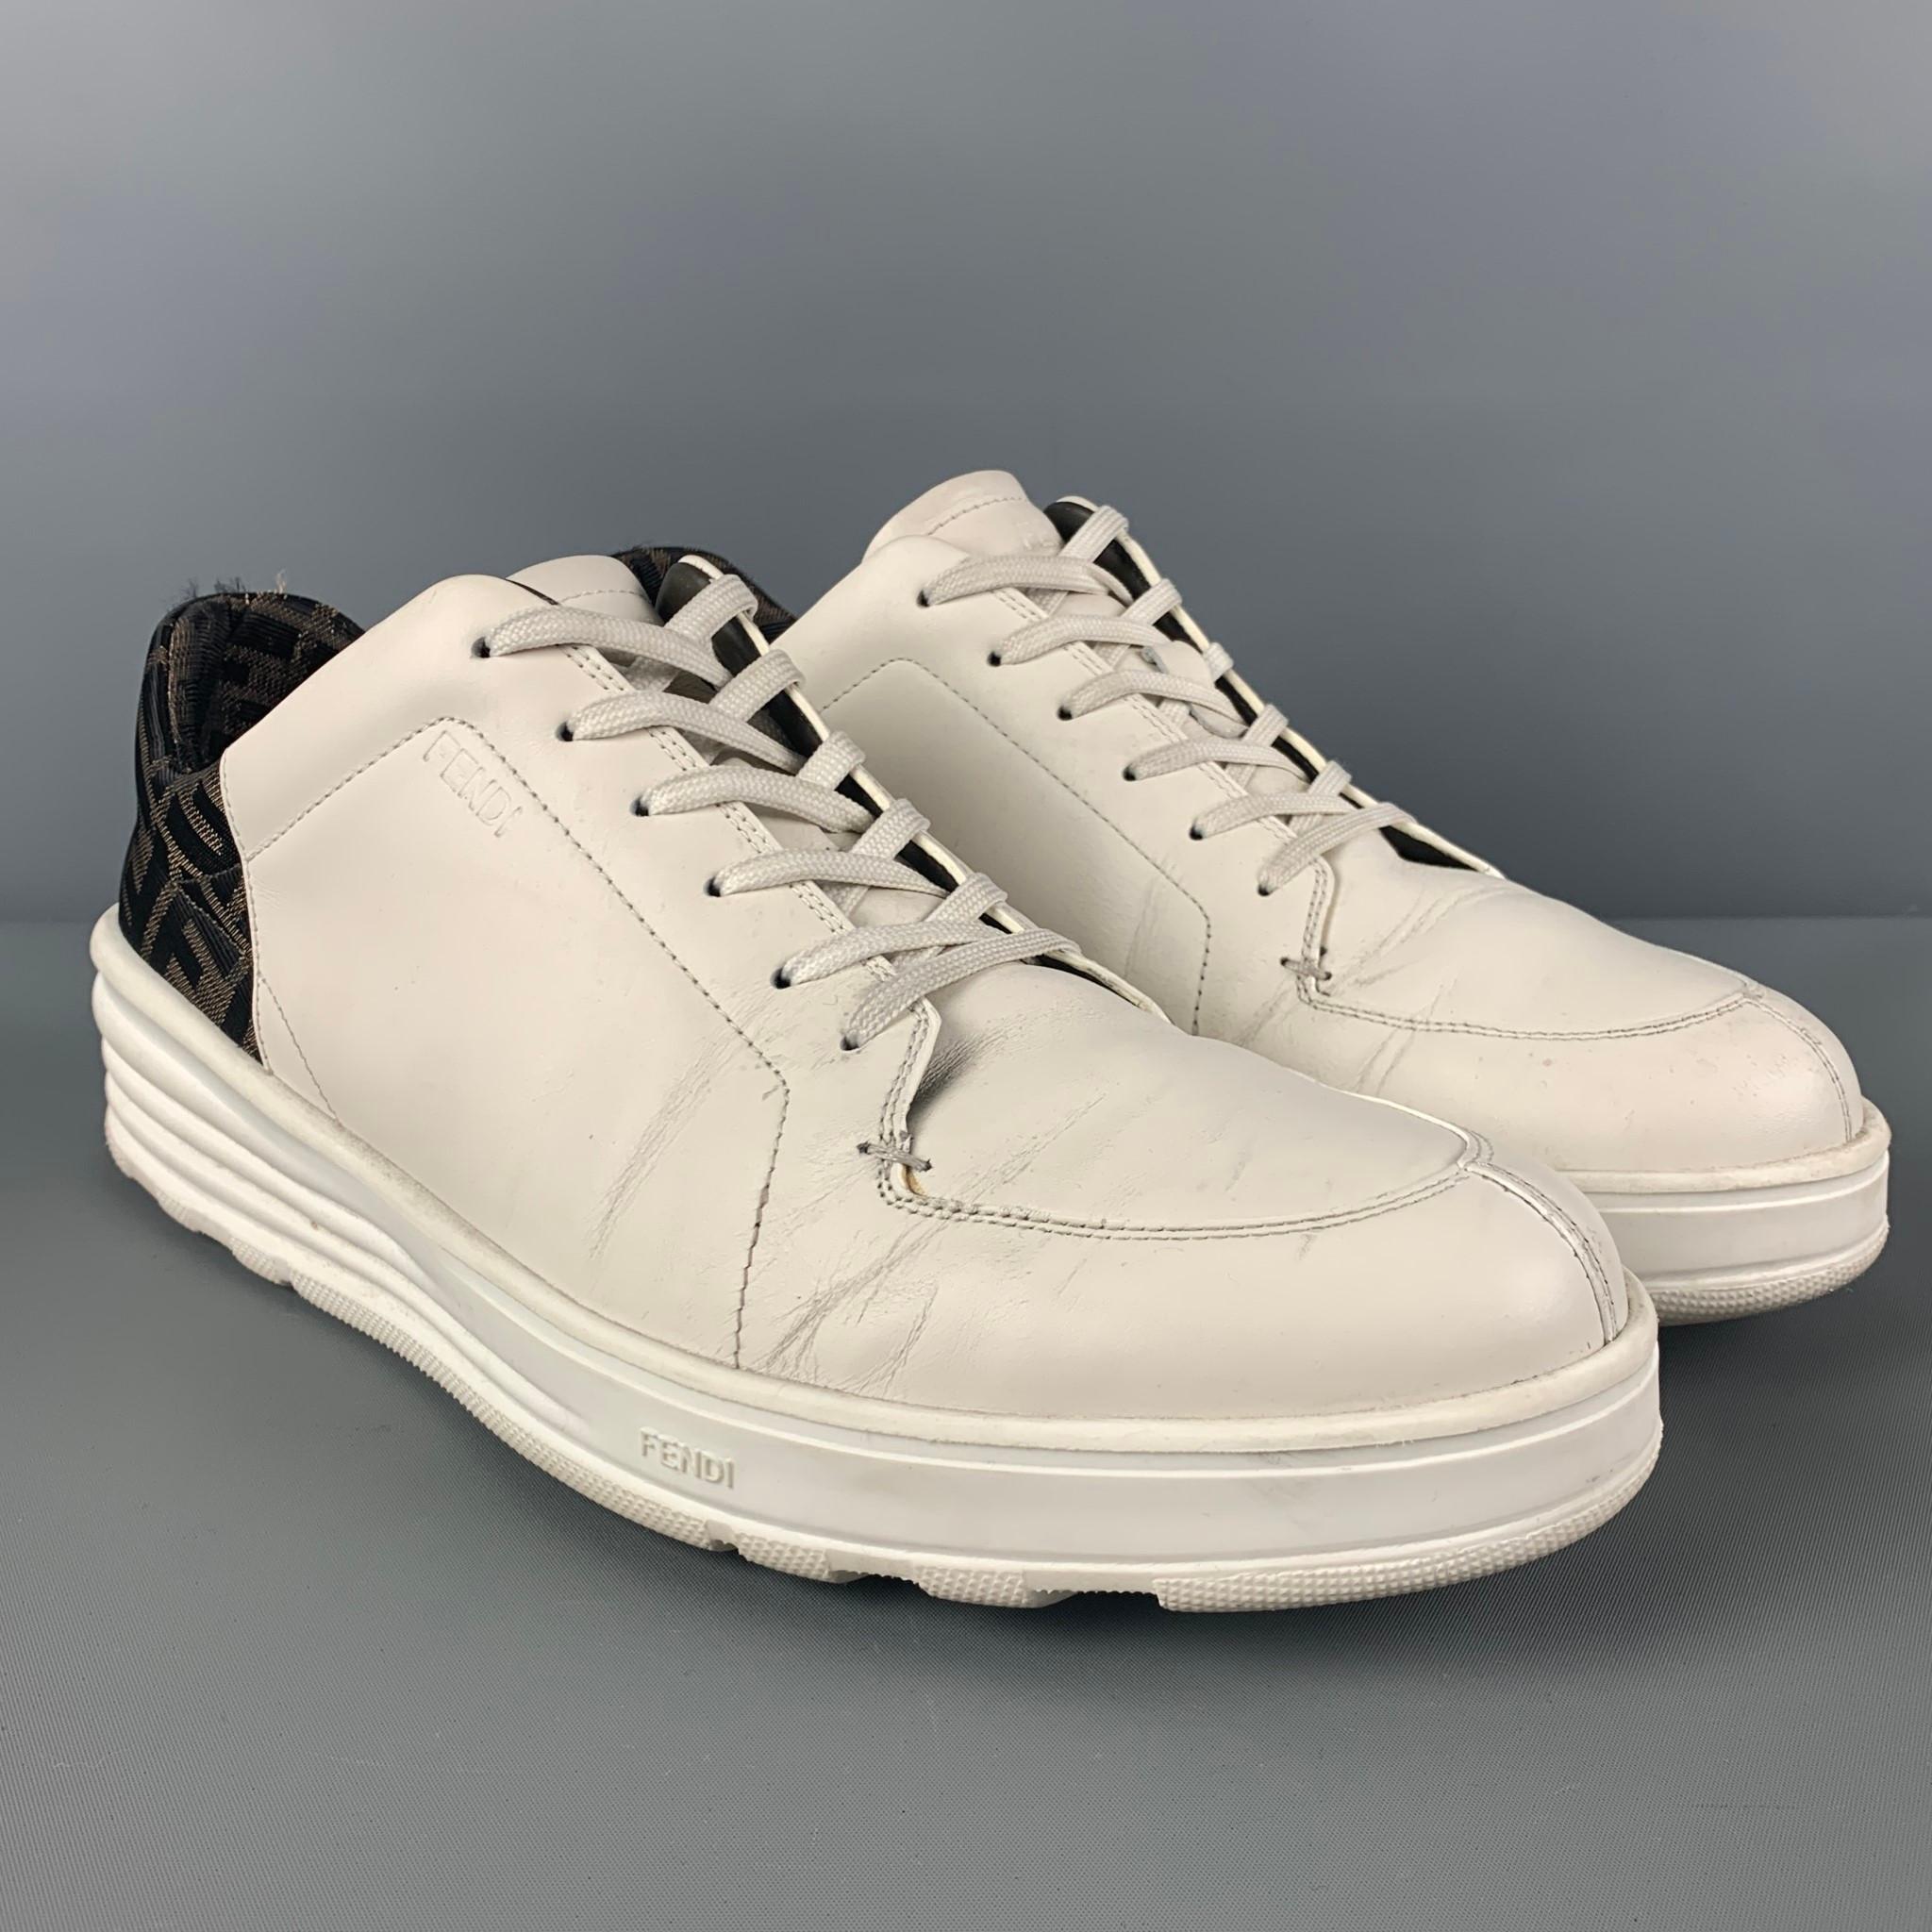 FENDI sneakers comes in a white leather with a brown logo trim featuring a split toe and a lace up closure. Made in Italy. Includes dust bag. 

Good Pre-Owned Condition. Moderate wear throughout.
Marked: Size not visible.

Outsole: 13 in. x 4.5 in.